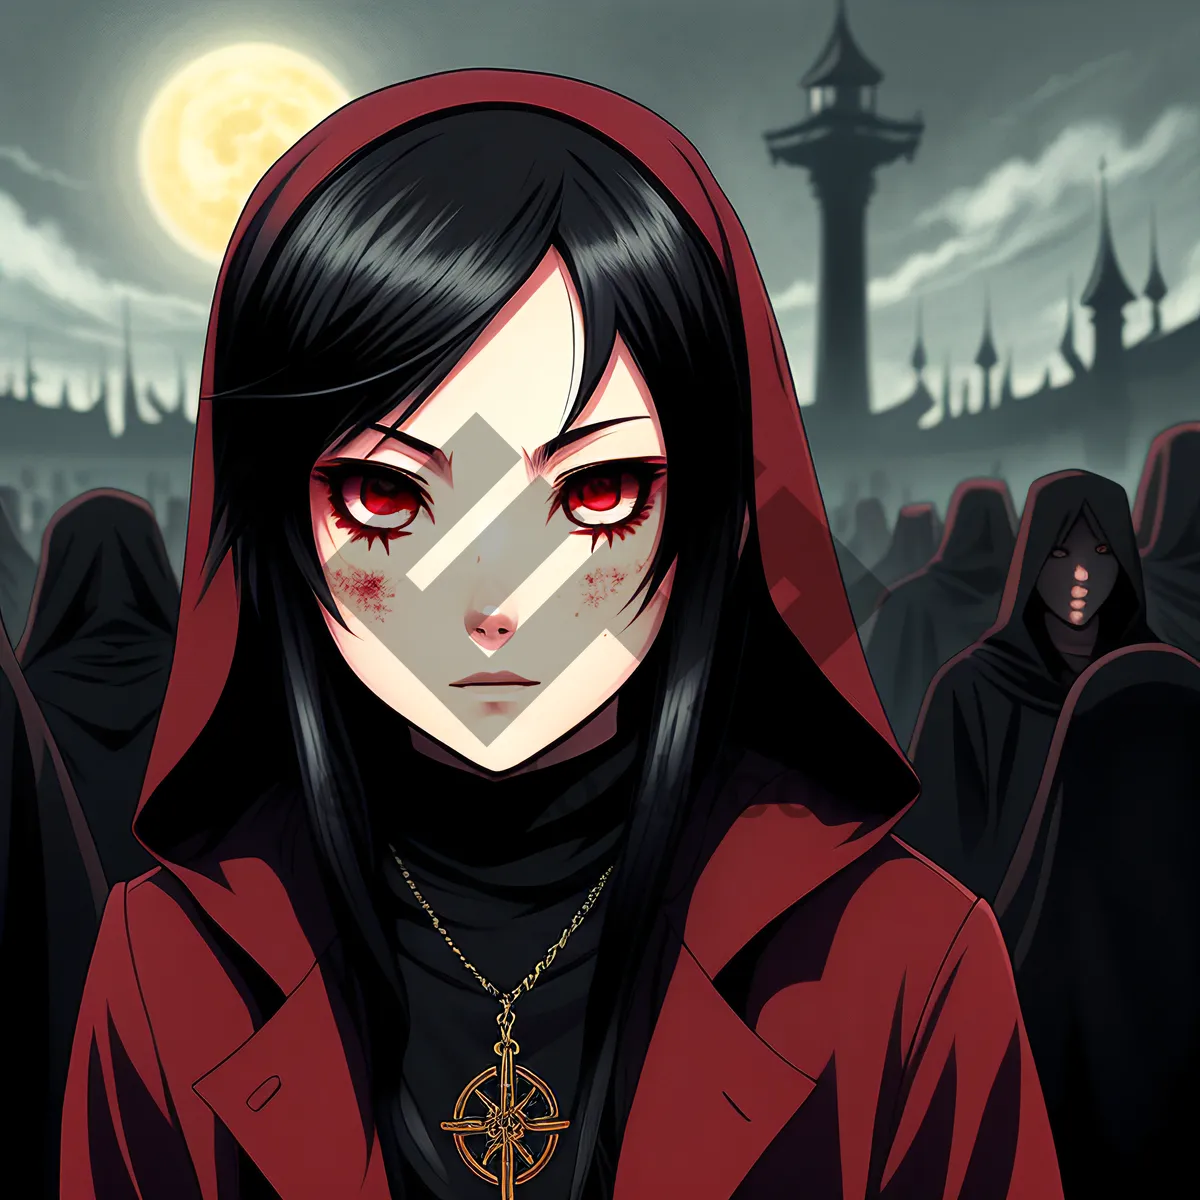 Picture of Black Cloaked Fashion Portrait: Alluring Lady with Mysterious Eyes